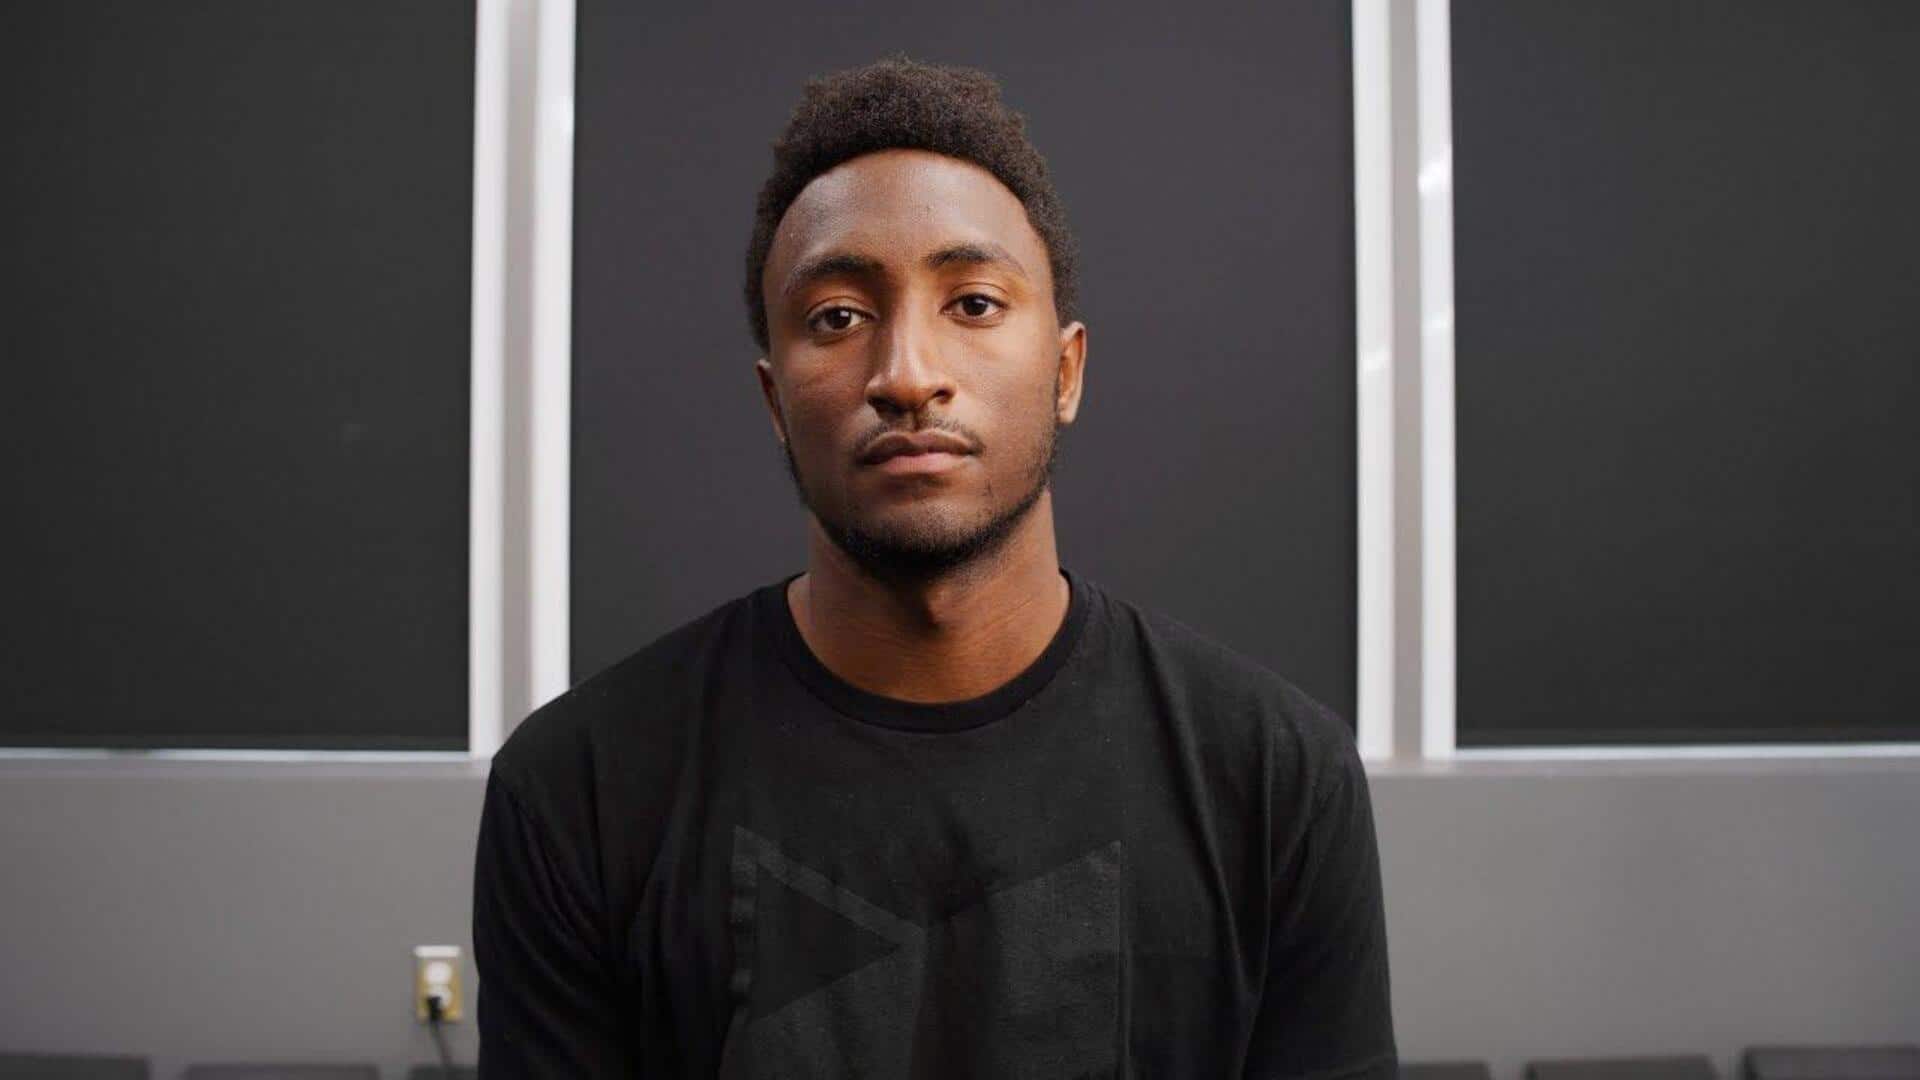 MKBHD condemns Dbrand for racist behavior toward Indian customer